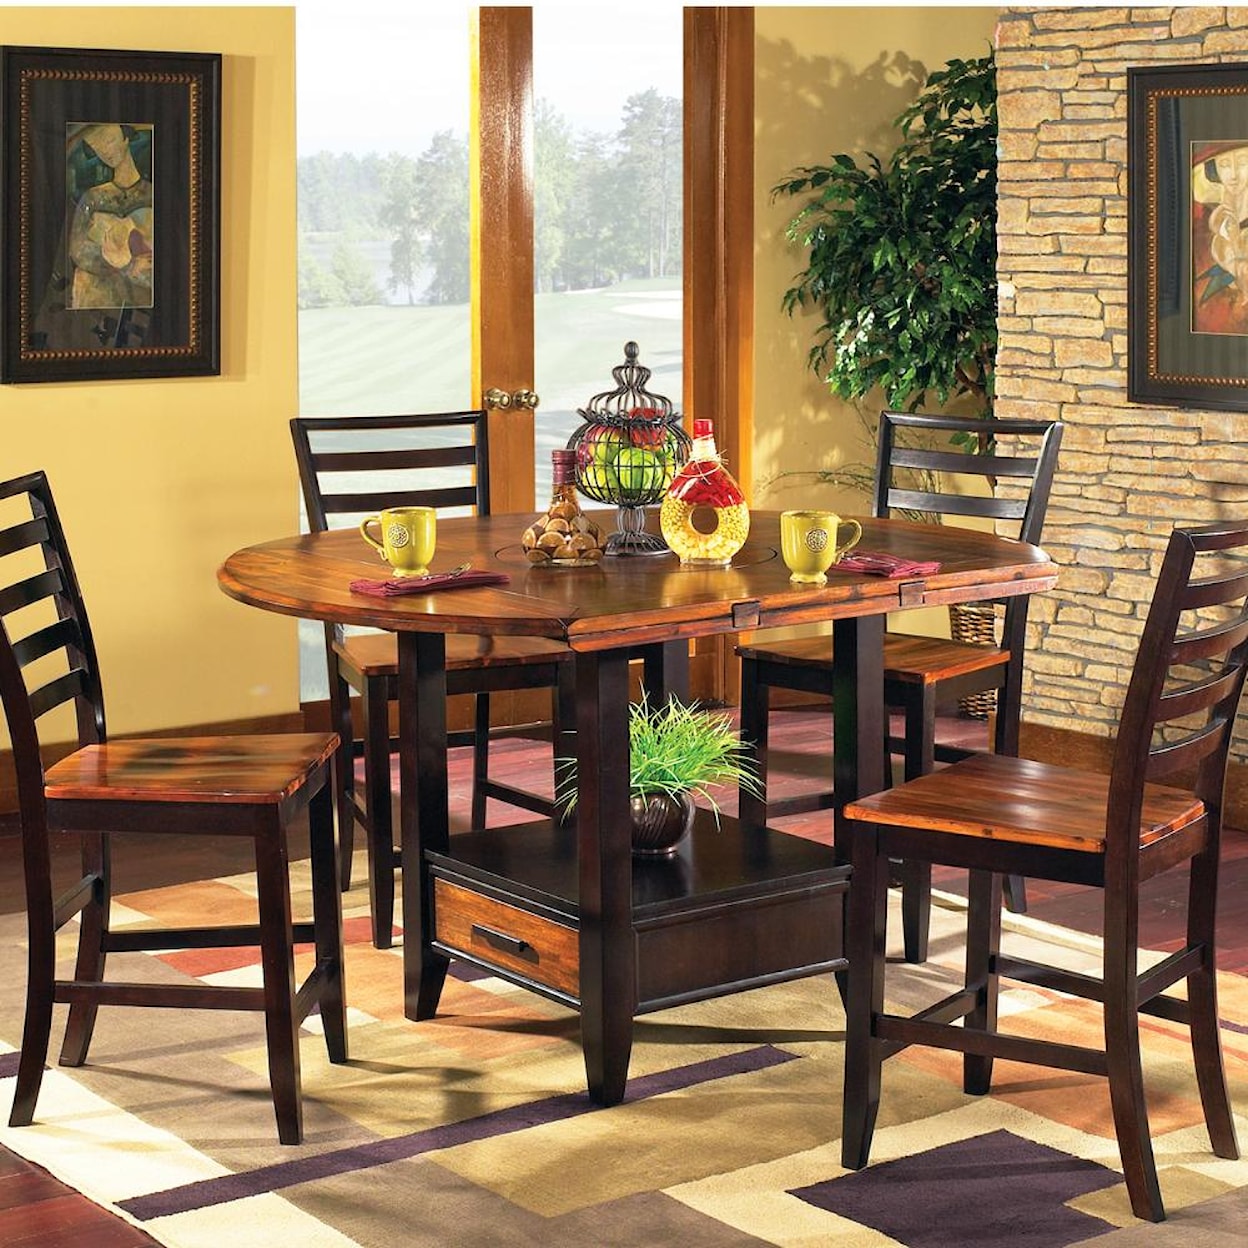 Steve Silver Abaco 5-Piece Square/Round Gathering Table Set